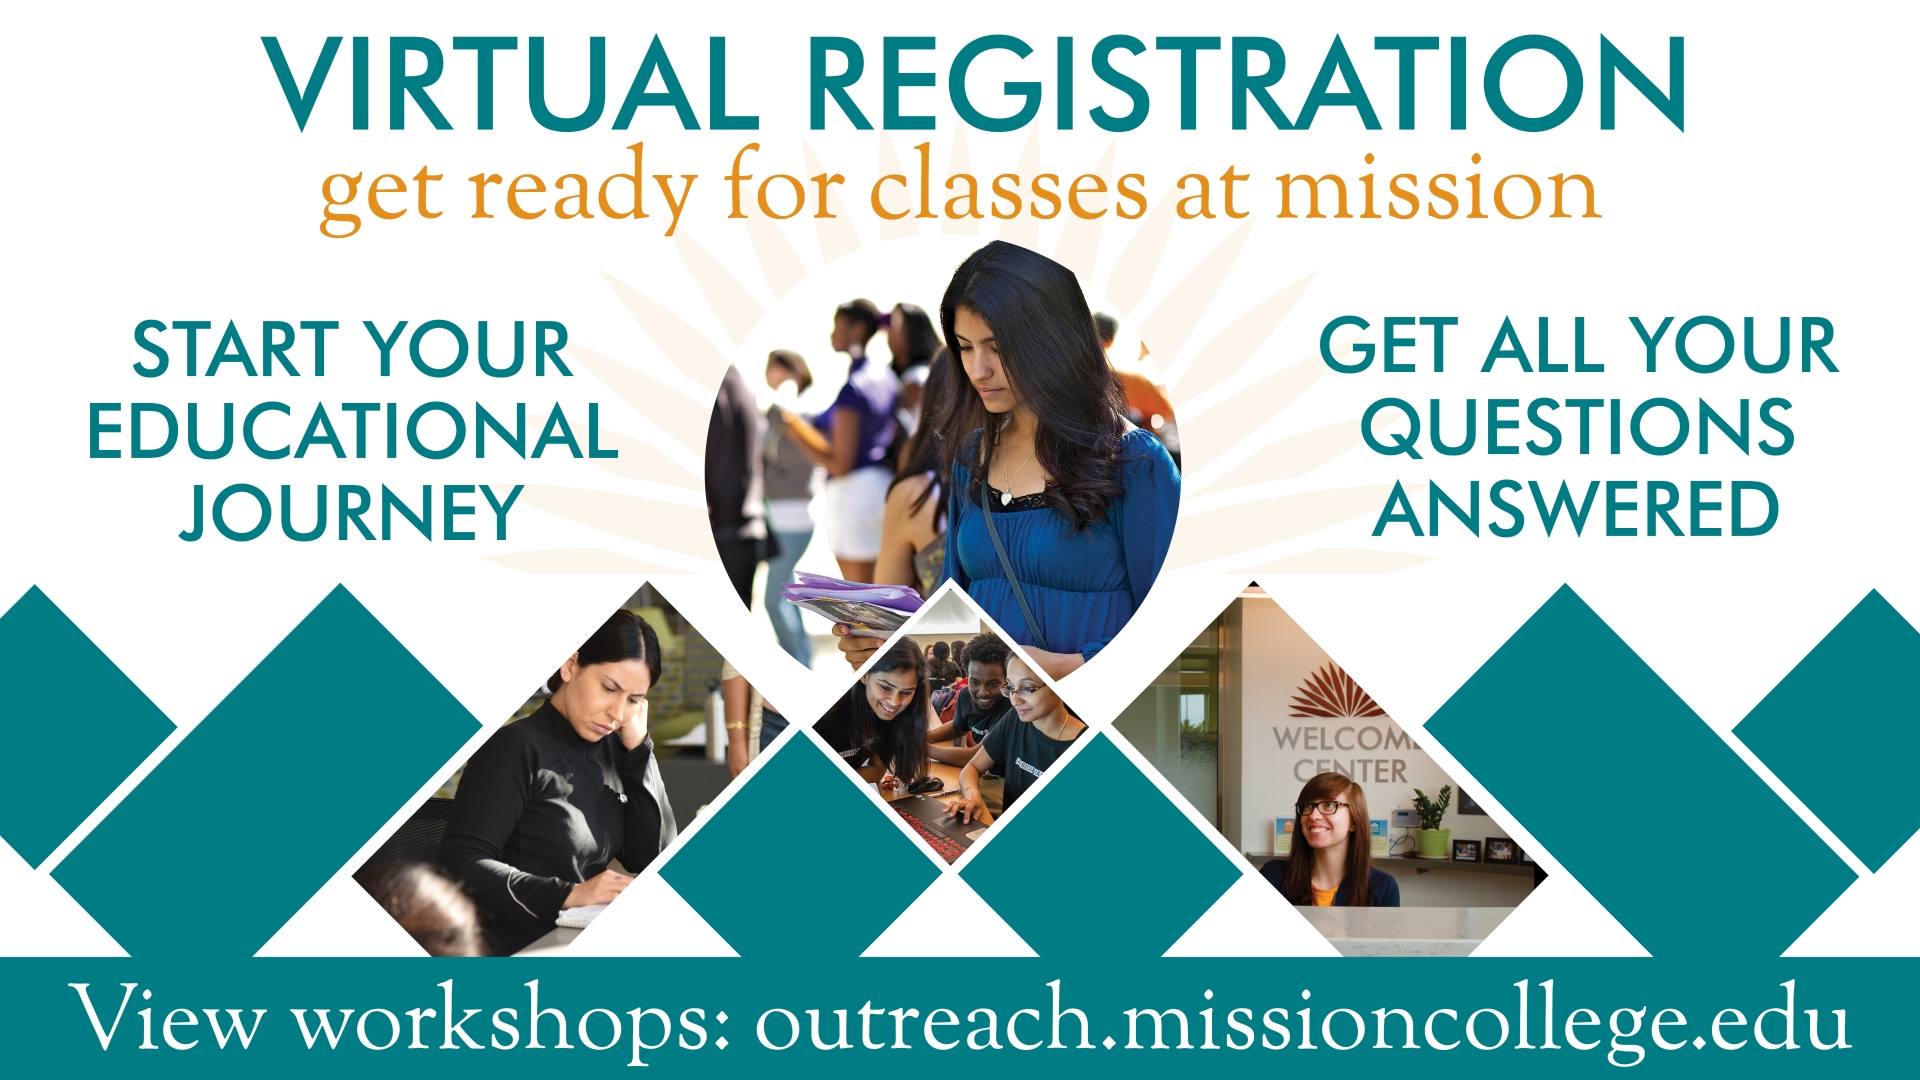 Virtual registration workshops. Everything you need to get started as a student a MC.